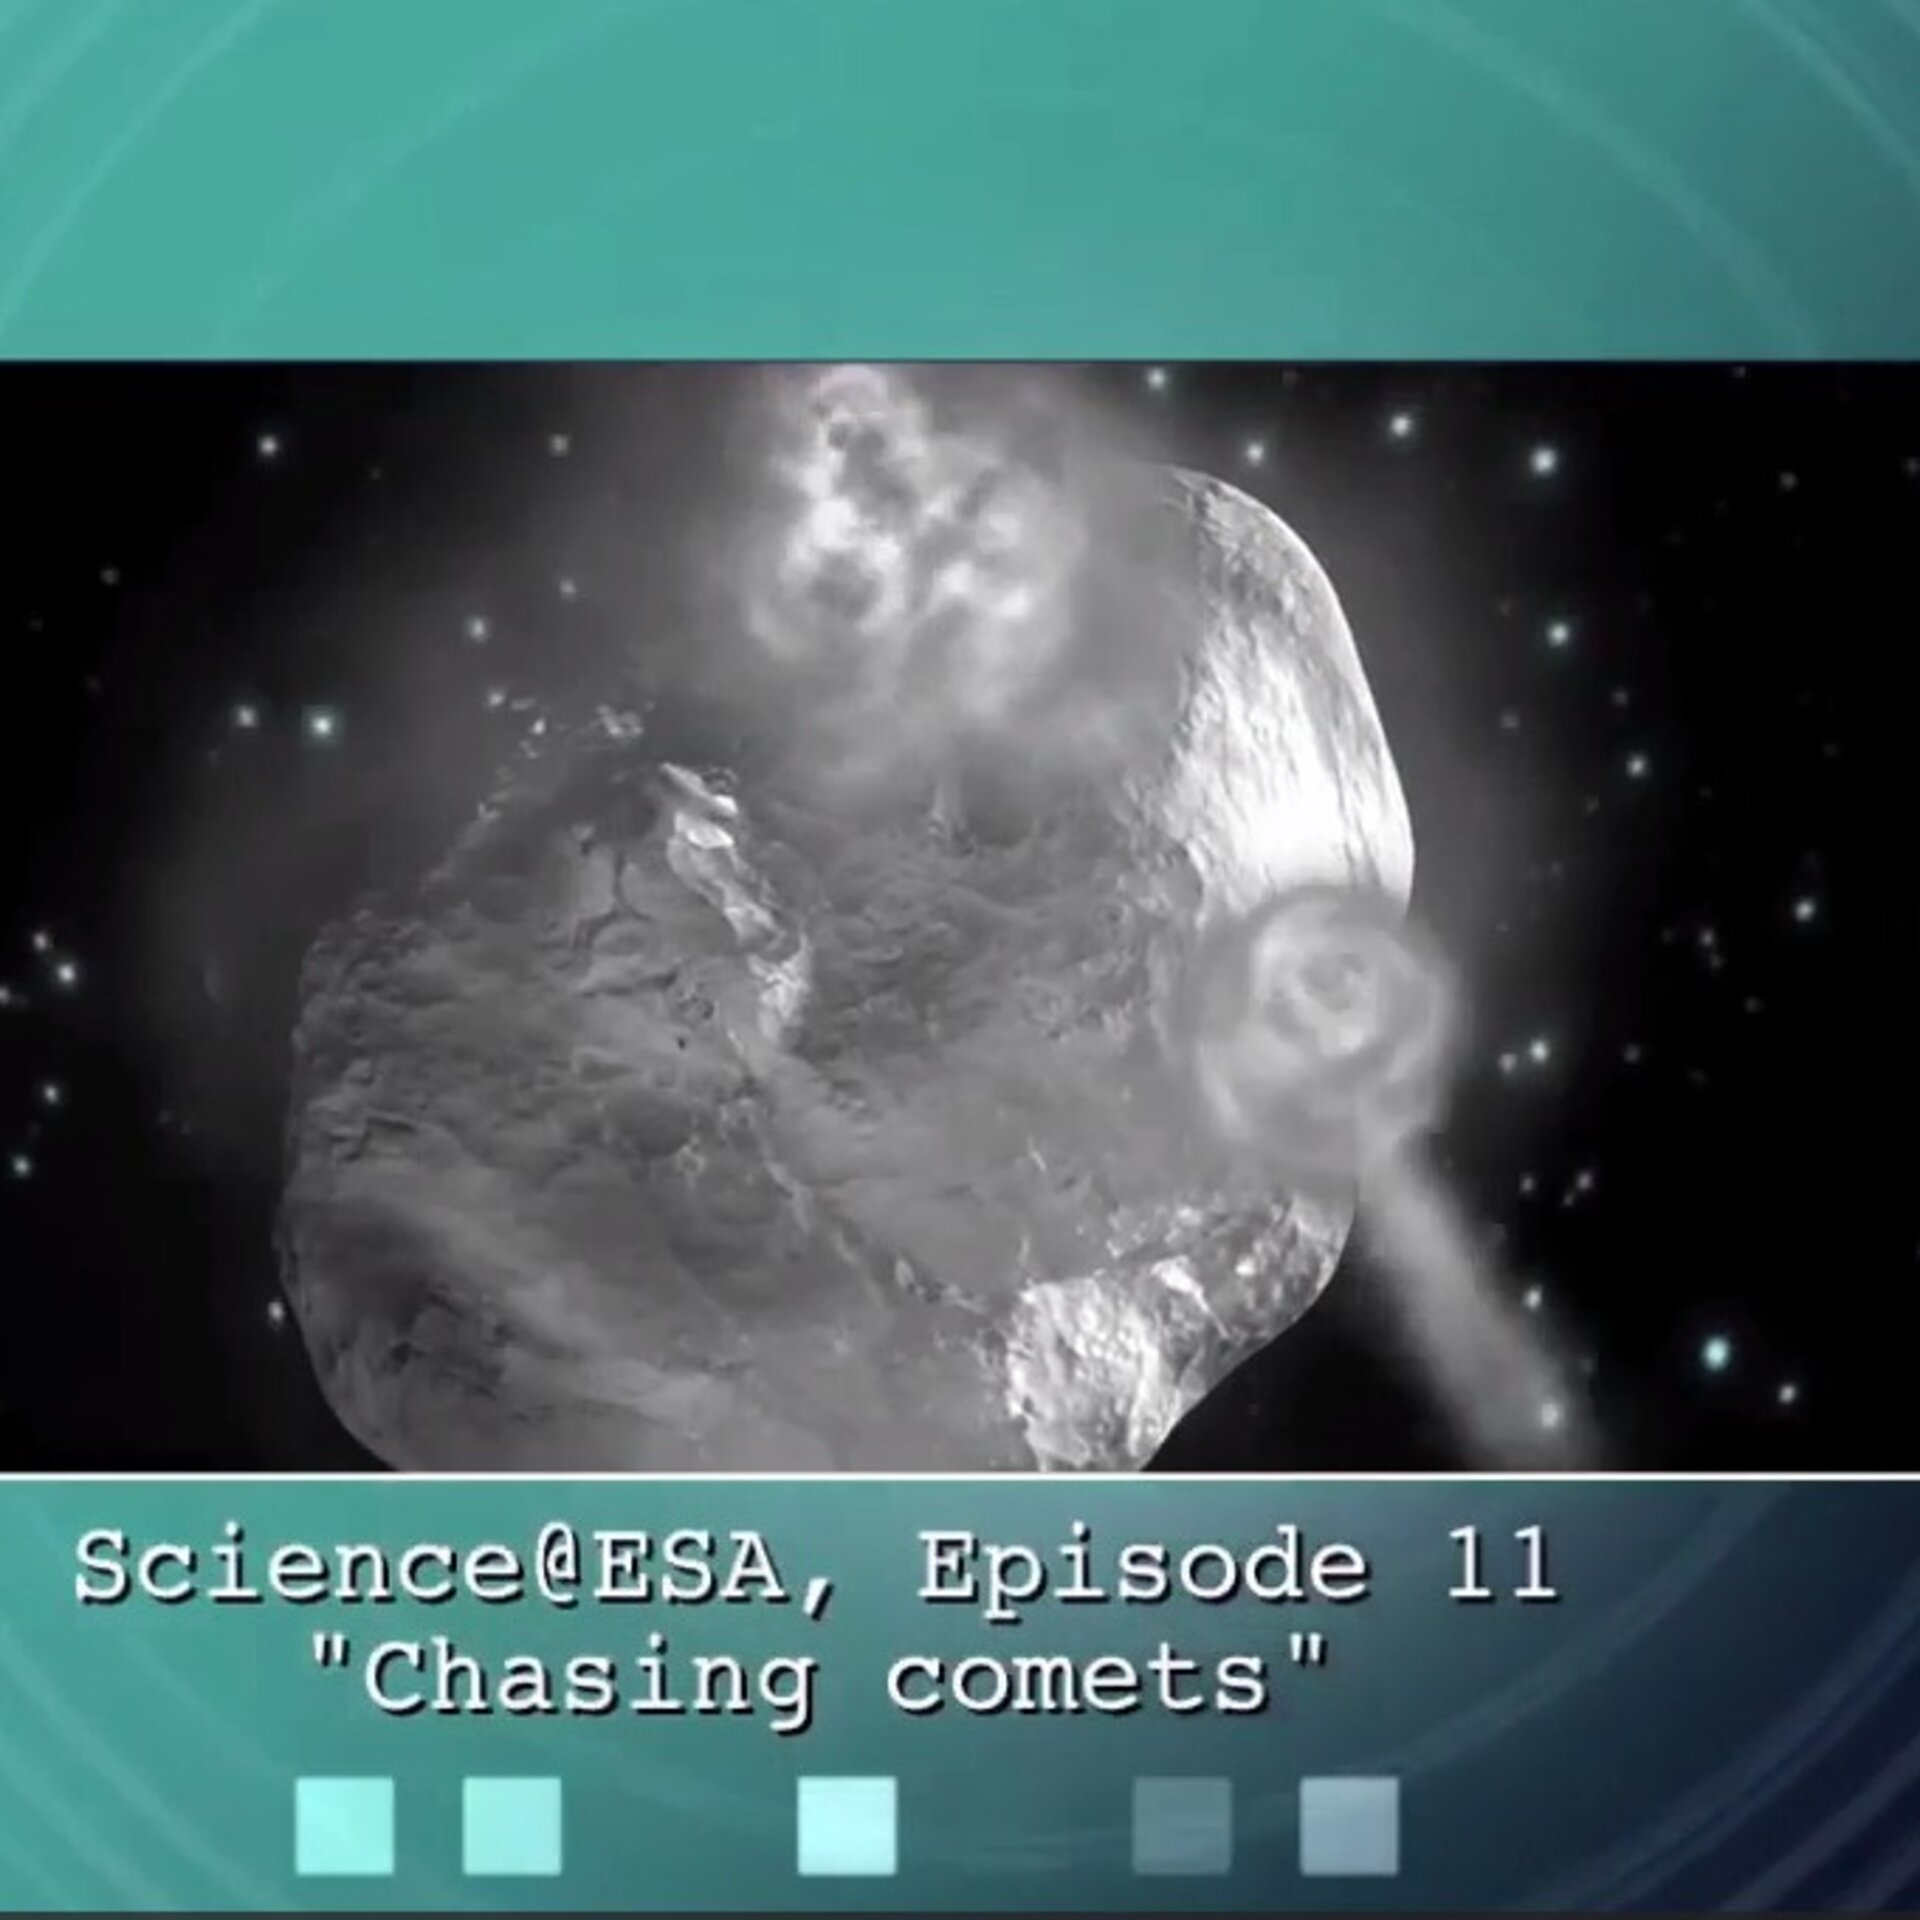 Science@esa: Episode 11: Chasing comets